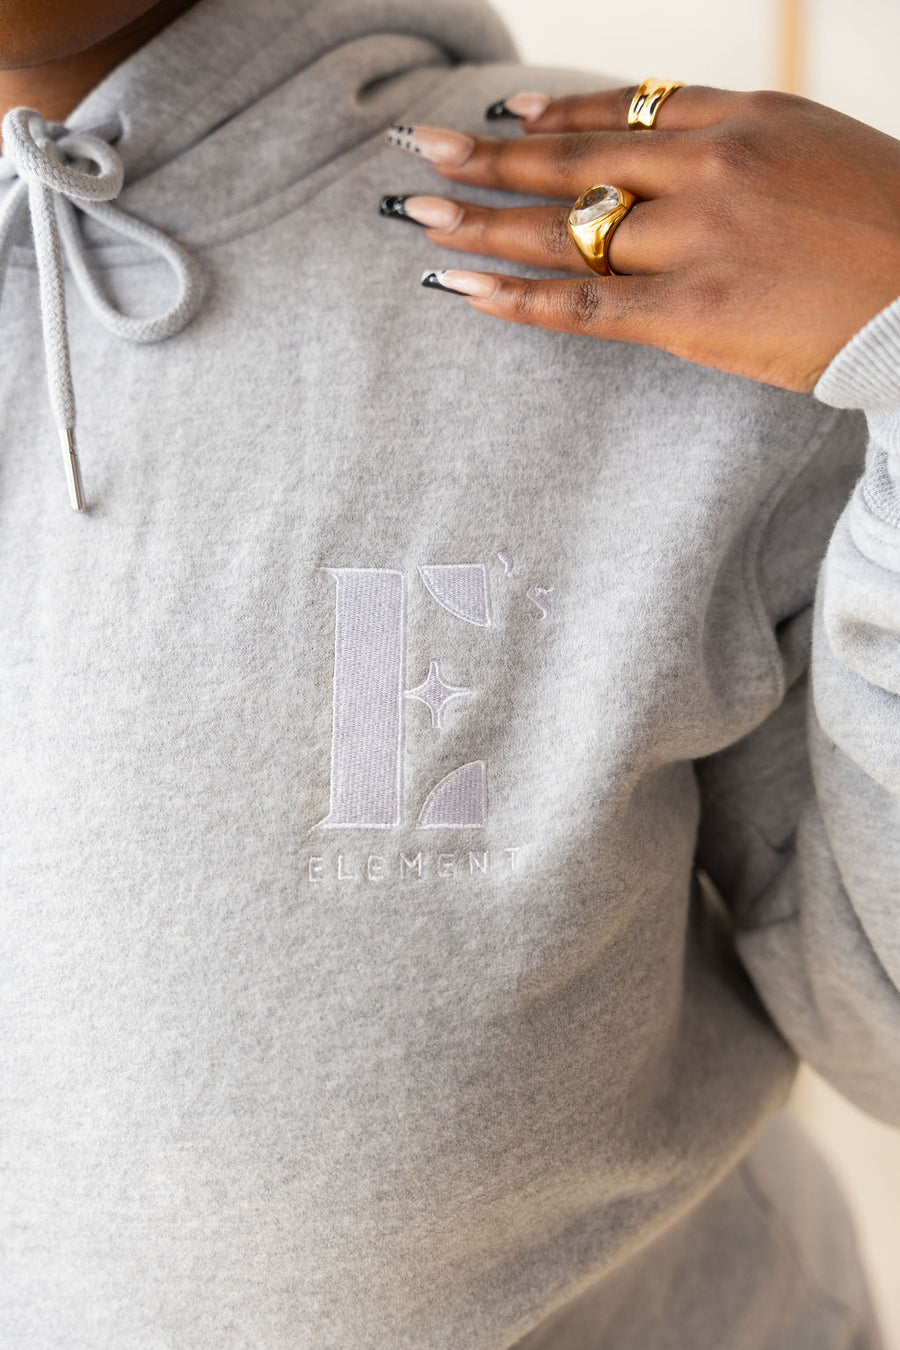 Model wearing a light grey hoodie with the E's Element logo imprinted in white. On her ring and index finger are 18k gold rings. The hoodie is a part of the Essential Light Grey Sweatsuit set by E's Element.